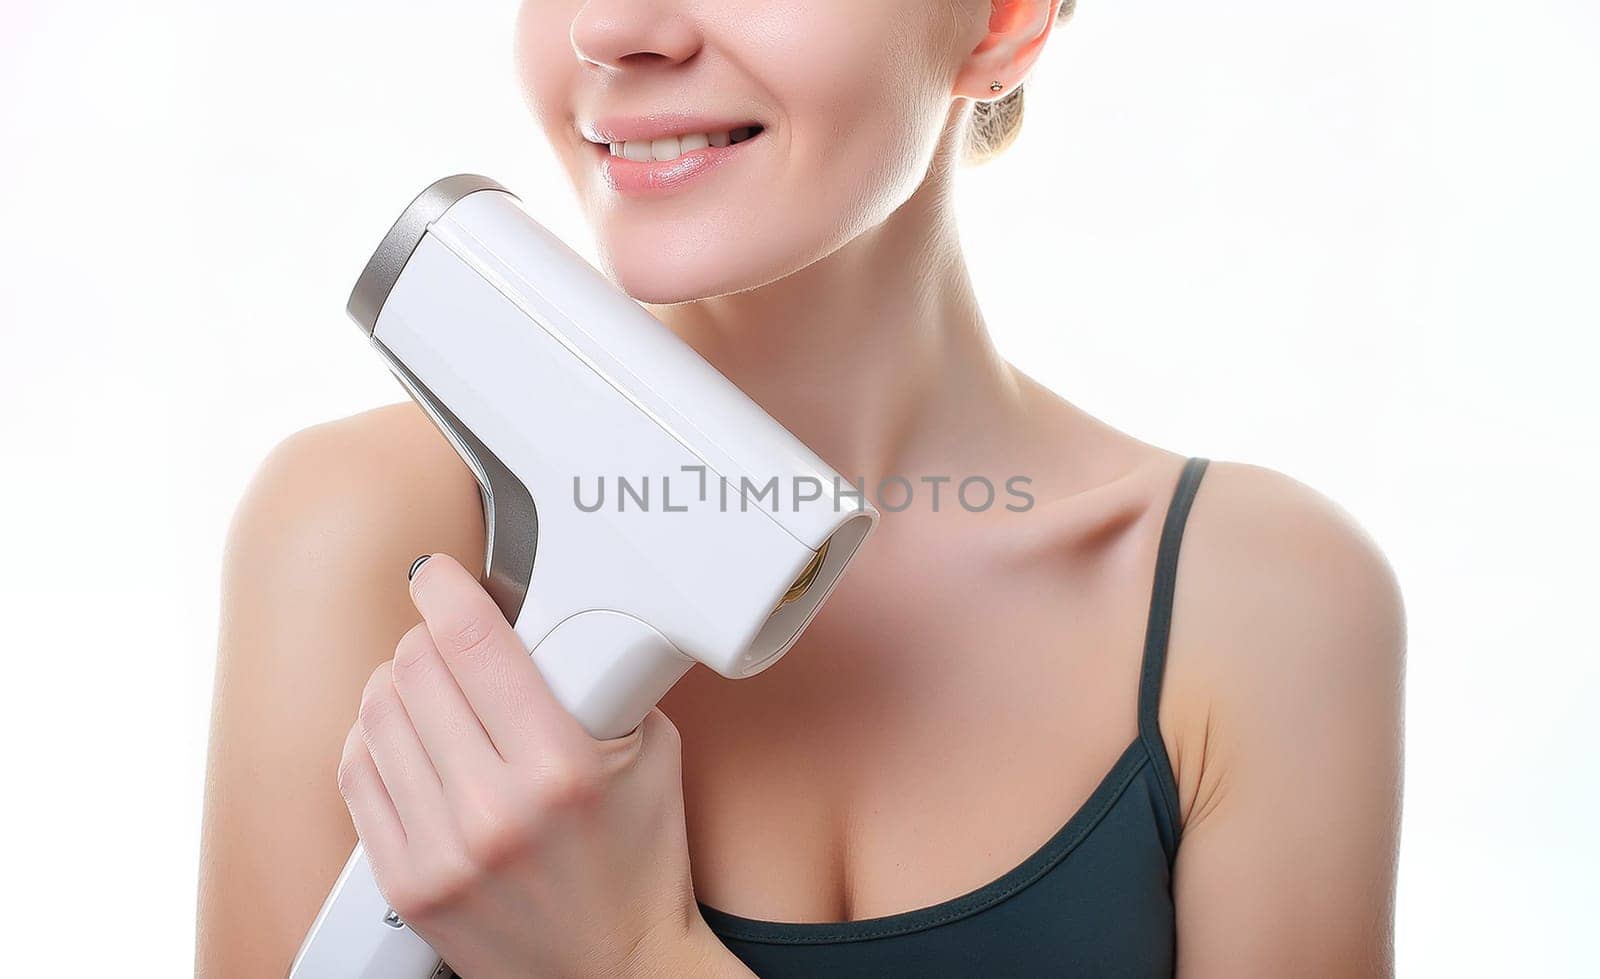 home modern laser epilator in a woman's hand. Hair Remover offering Permanently Smooth Skin. Flash Epilator Laser on a pink background. Female blog concept. Photoepilator for home use.